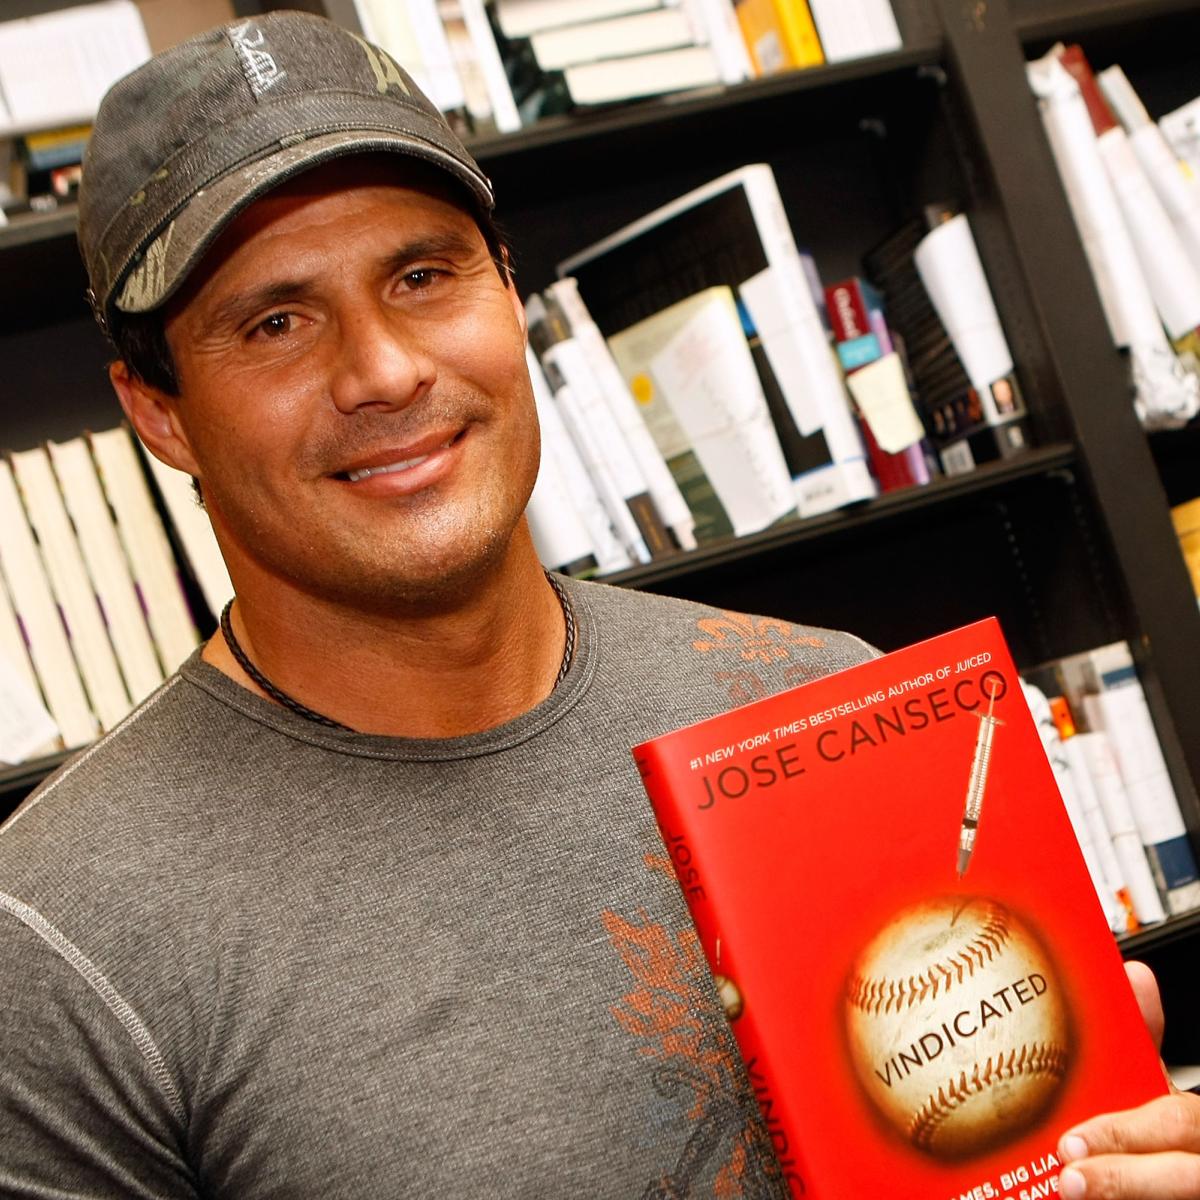 Ex-MLB star Jose Canseco making stop in Iowa